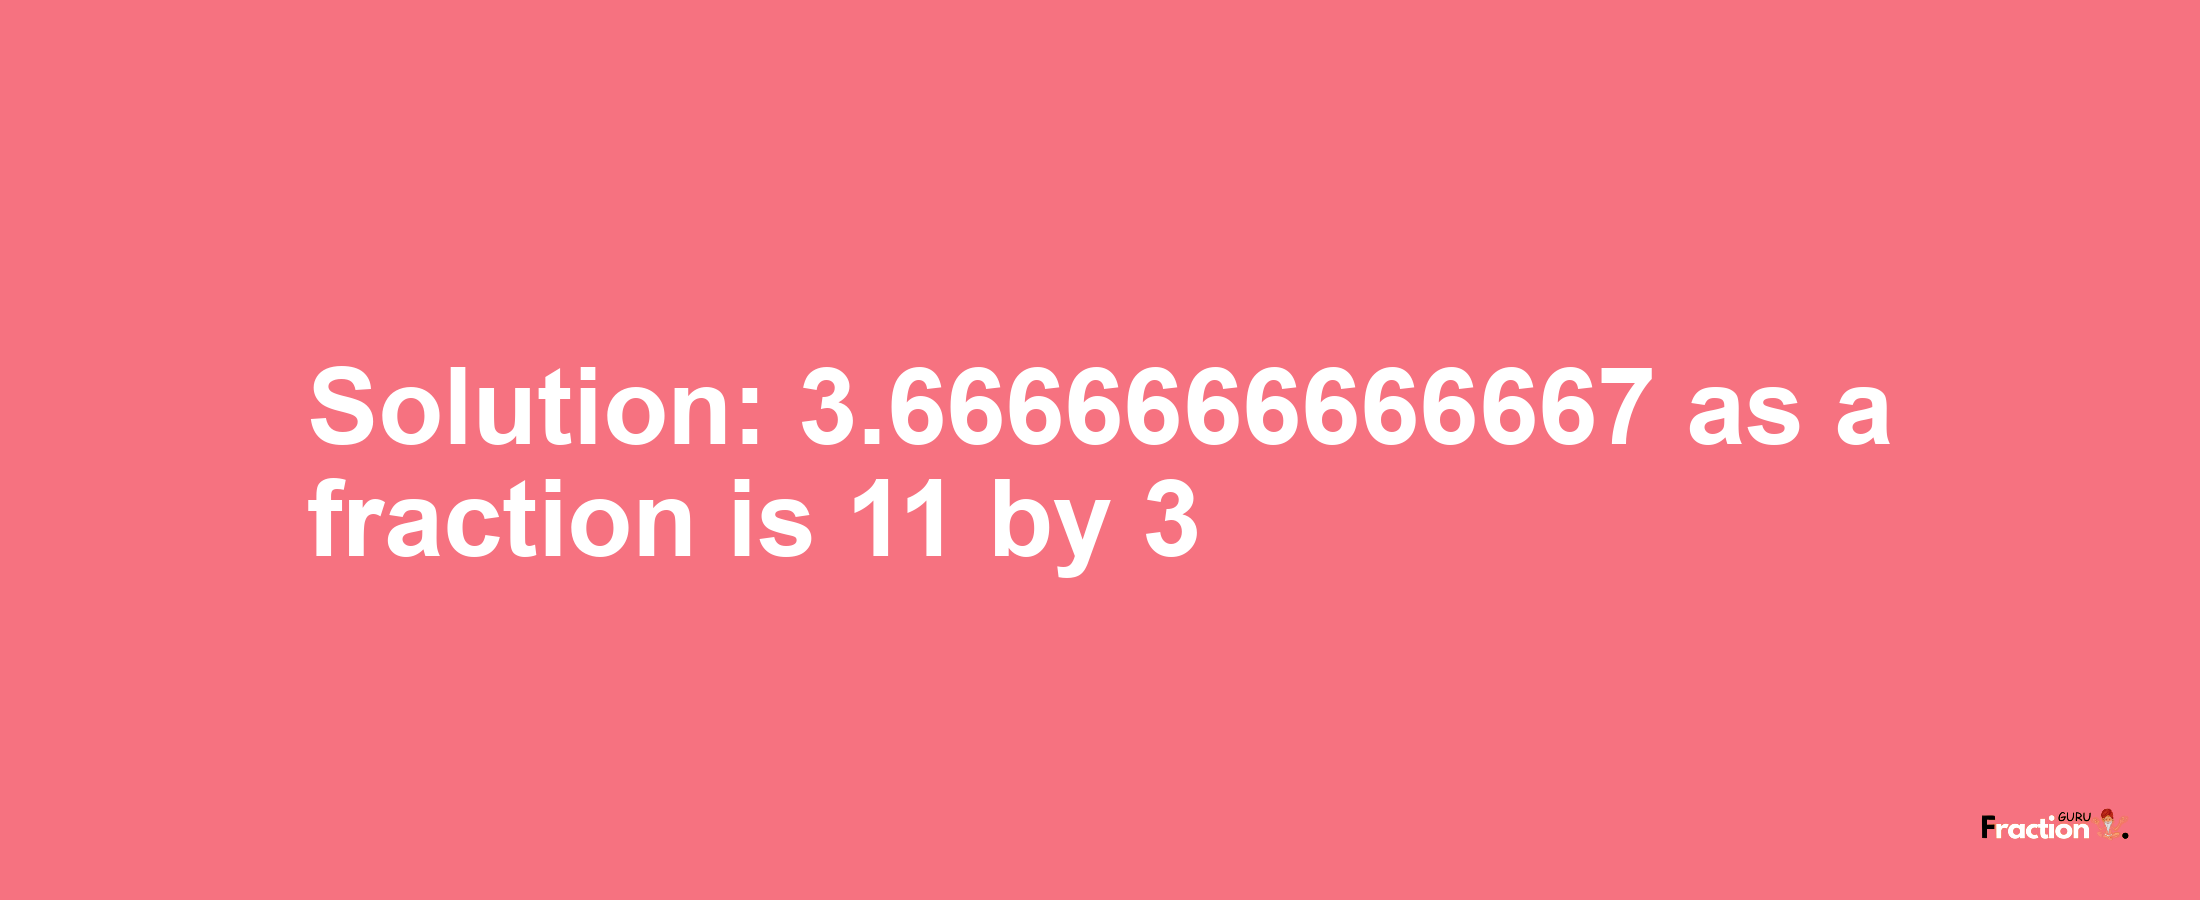 Solution:3.6666666666667 as a fraction is 11/3